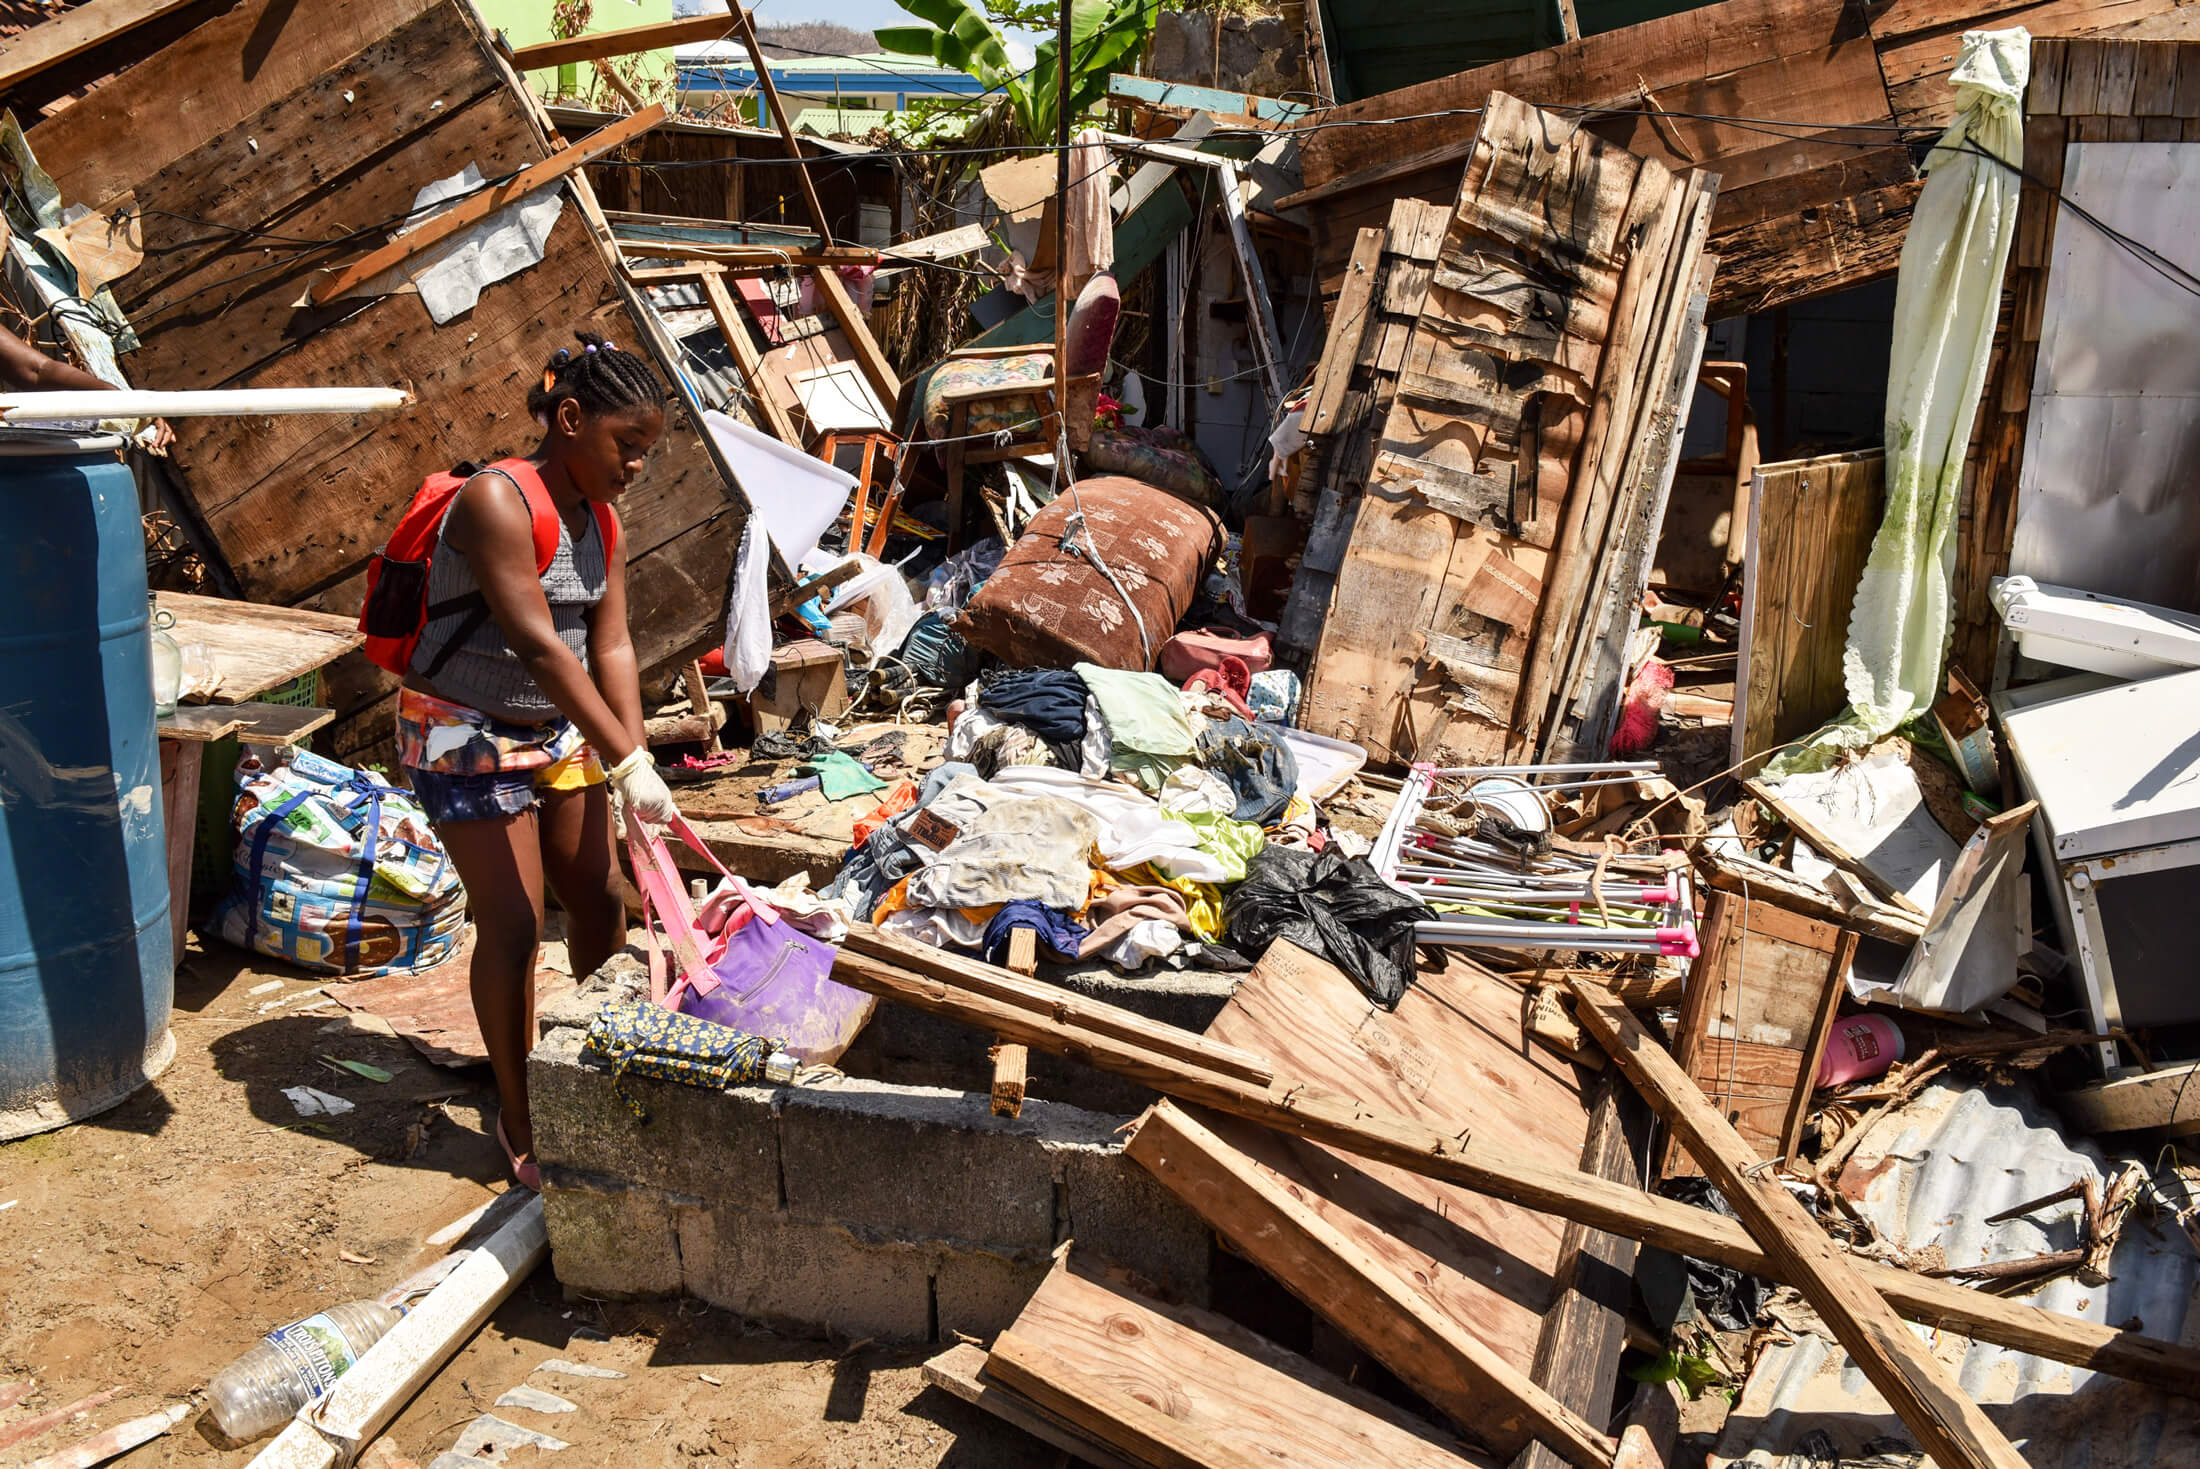 A woman picks through the remnants of a building destroyed by 2017’s Hurricane Maria, a Category 5 storm with winds of more than 175 mph that devastated communities across the Caribbean, caused more than $91 billion in damage and killed more than 3,000 people.